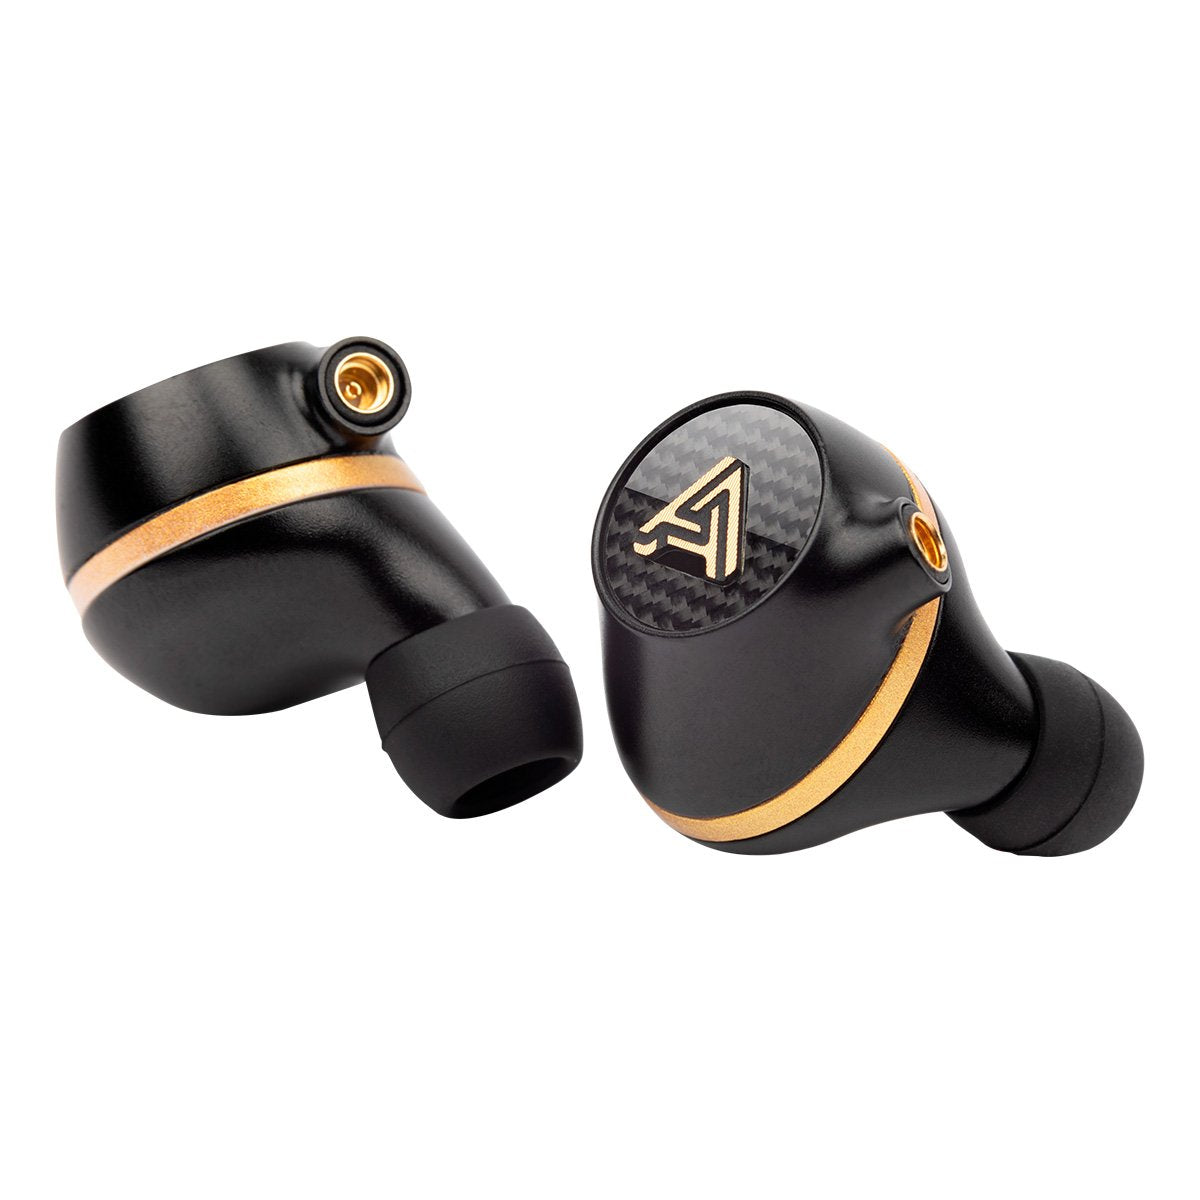 Audeze Euclid planar magnetic closed-back in-ear